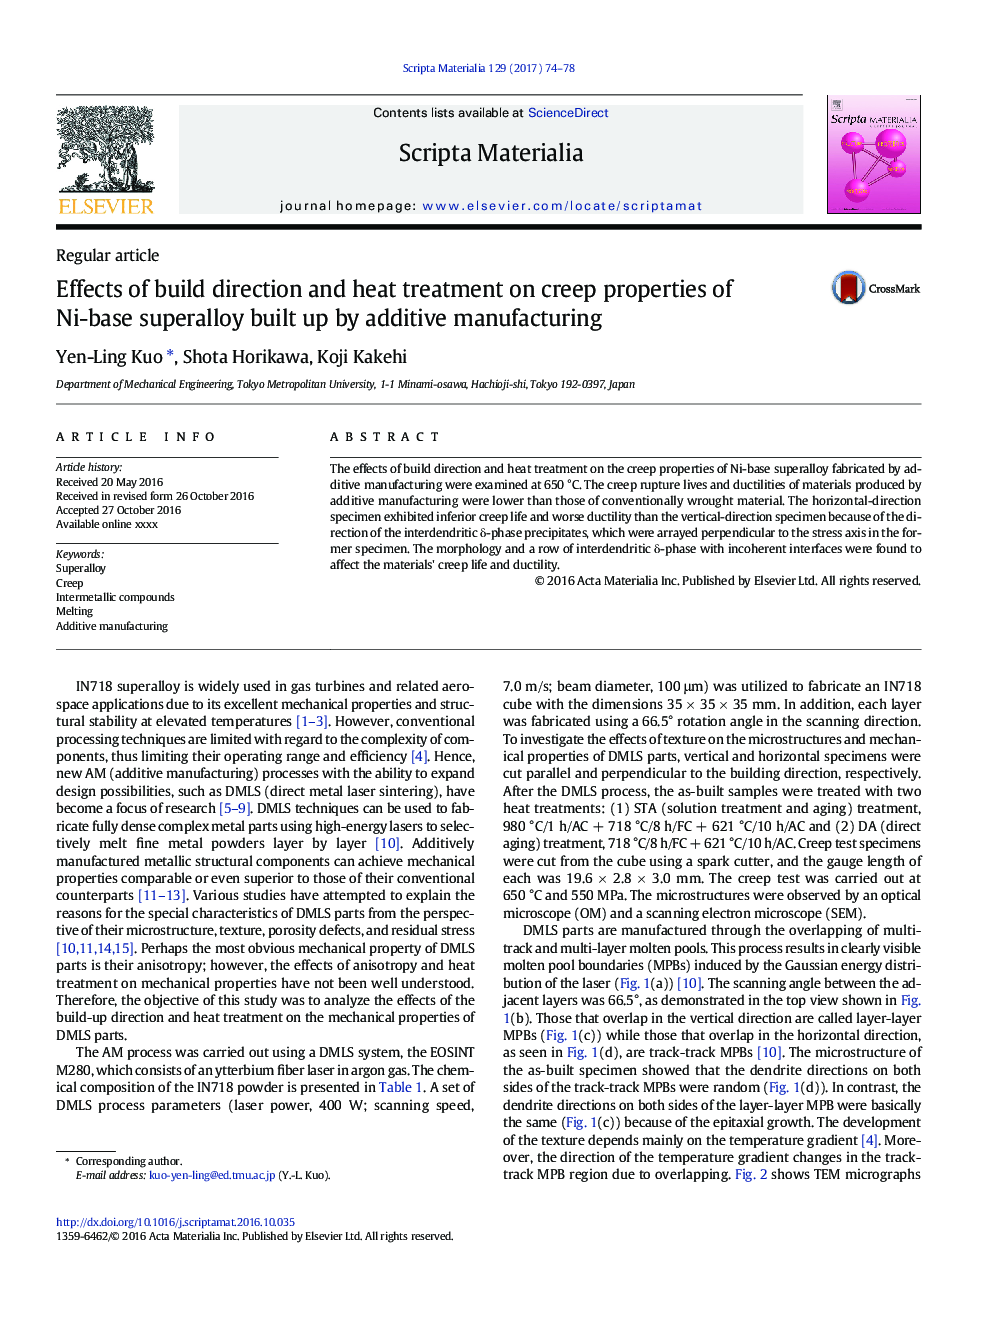 Effects of build direction and heat treatment on creep properties of Ni-base superalloy built up by additive manufacturing